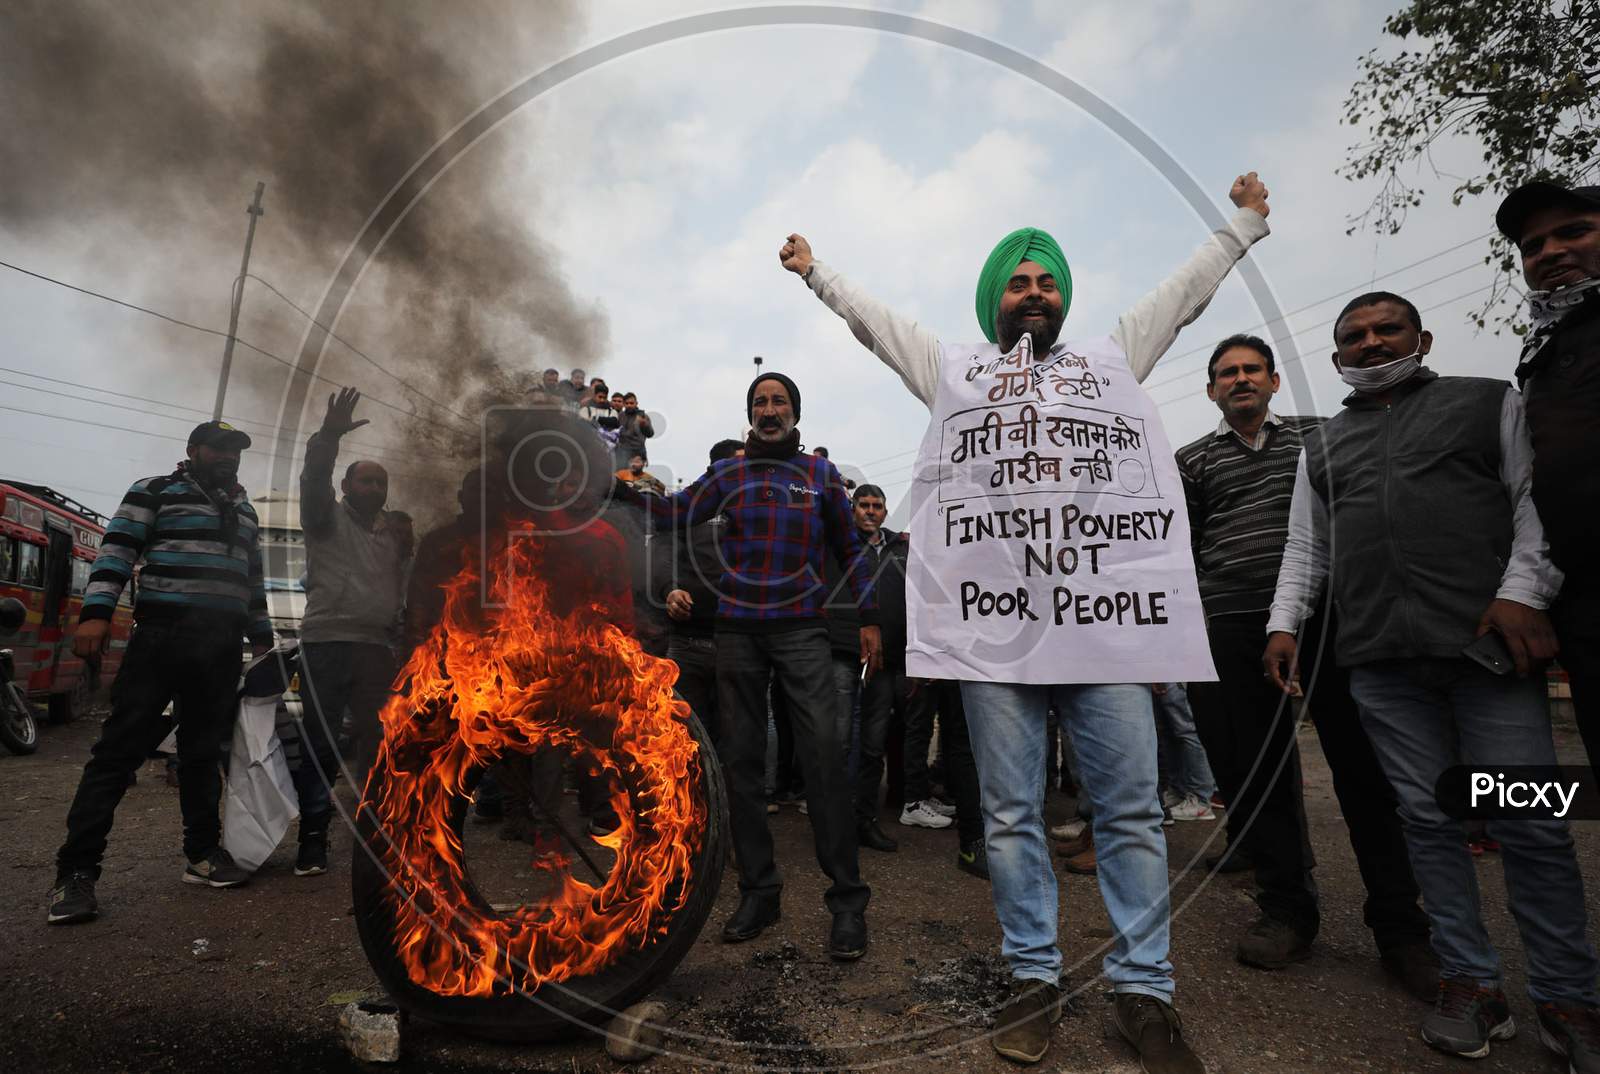 Bus drivers burn tyre during their day-long strike from Lakhanpur to Kashmir, organized by All J&K Transport Welfare Association, in support of their demands like waiving off token tax, passenger tax and renewal fee penalties due to COVID-19, at a bus stand in Jammu,6 Jan,2021.